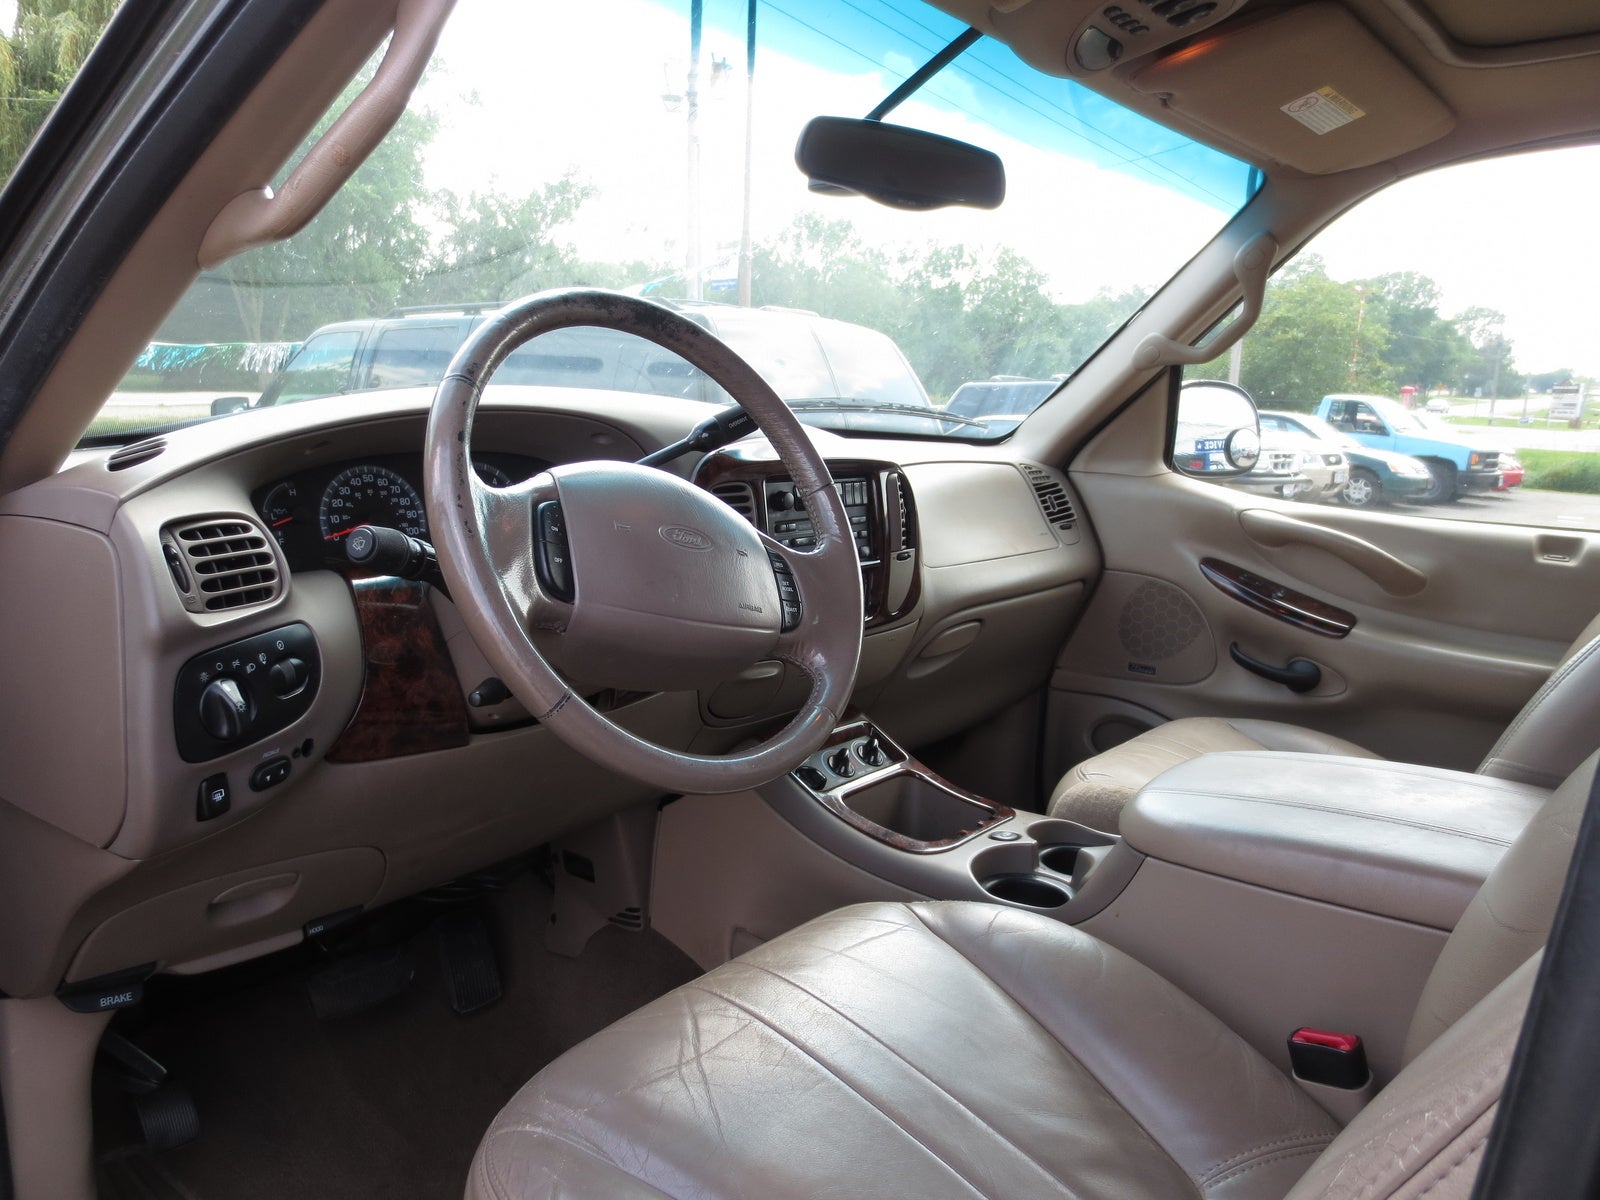 2000 Ford expedition interior dimensions #10